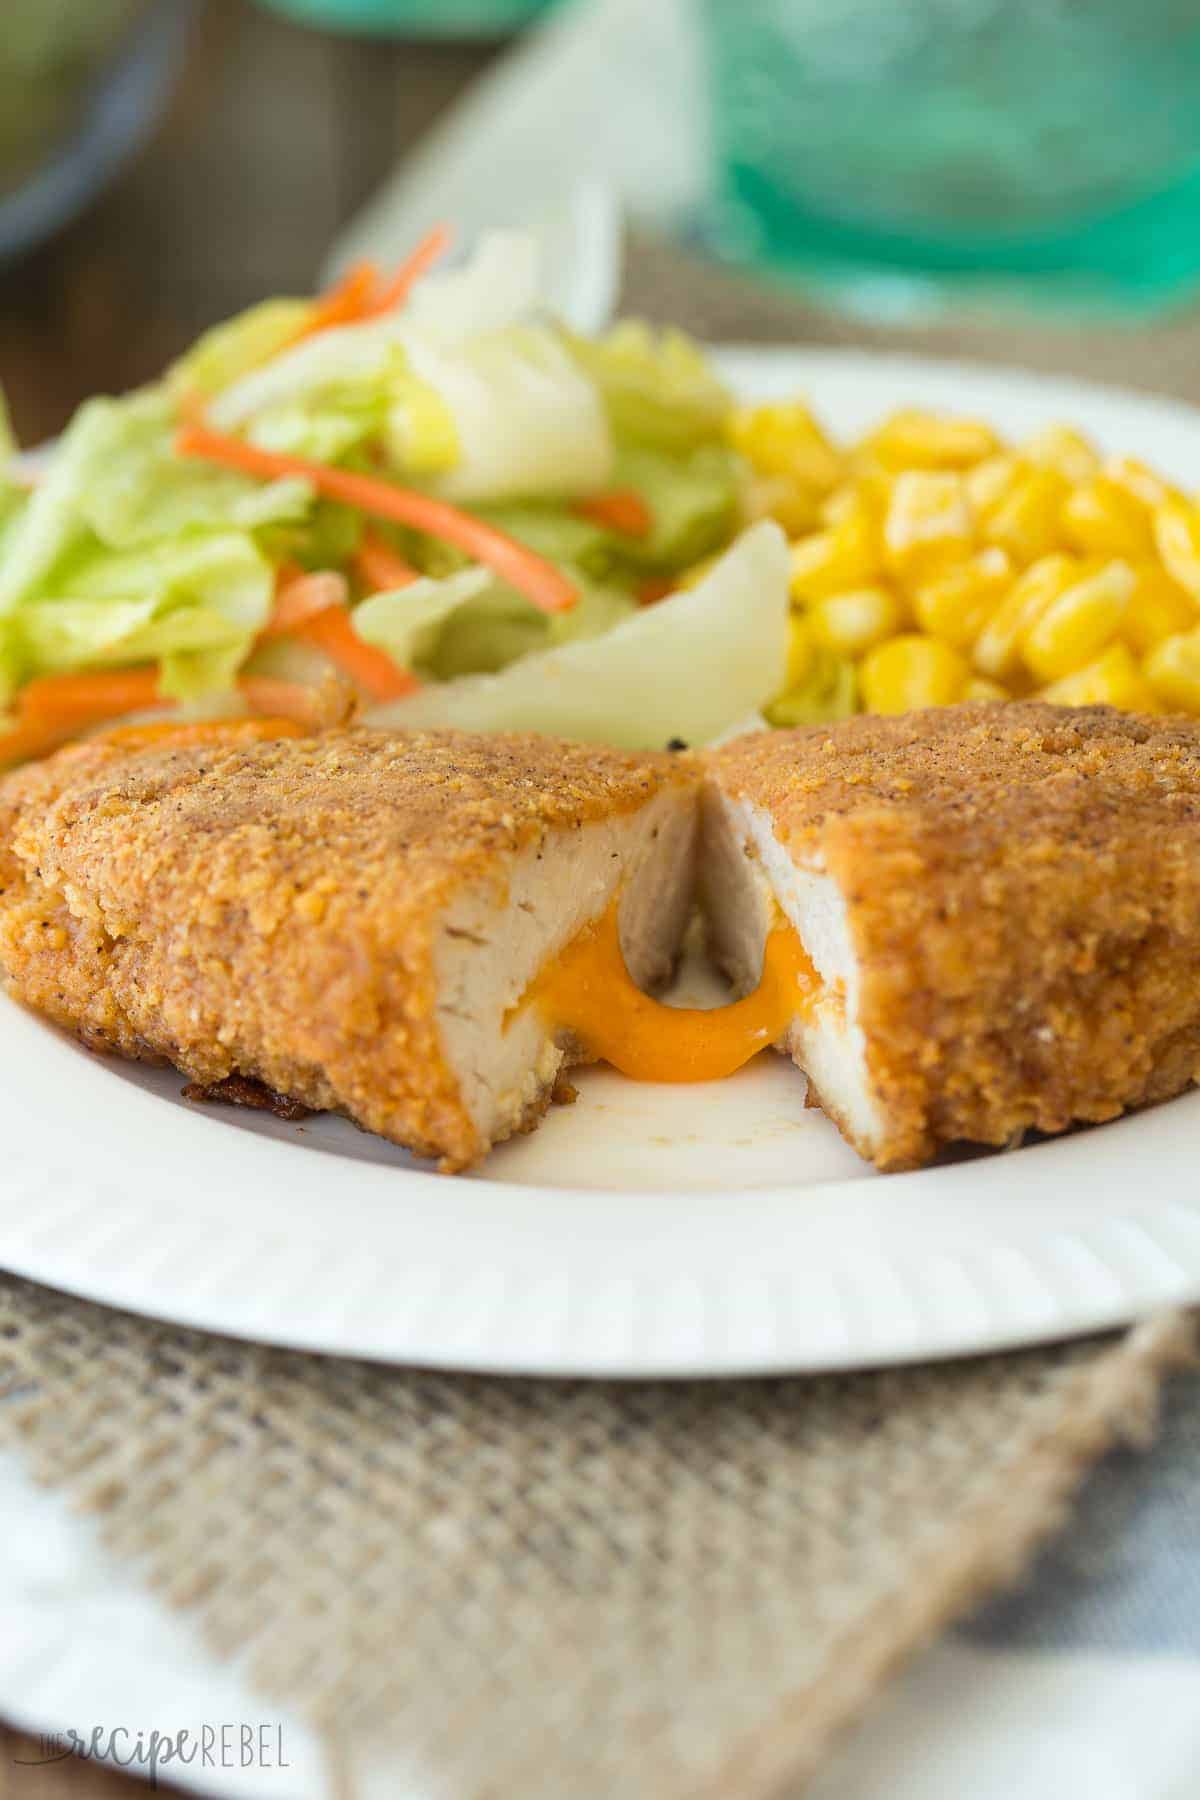 nacho cheese oven fried chicken on white plate with salad and corn cut in half to reveal cheese